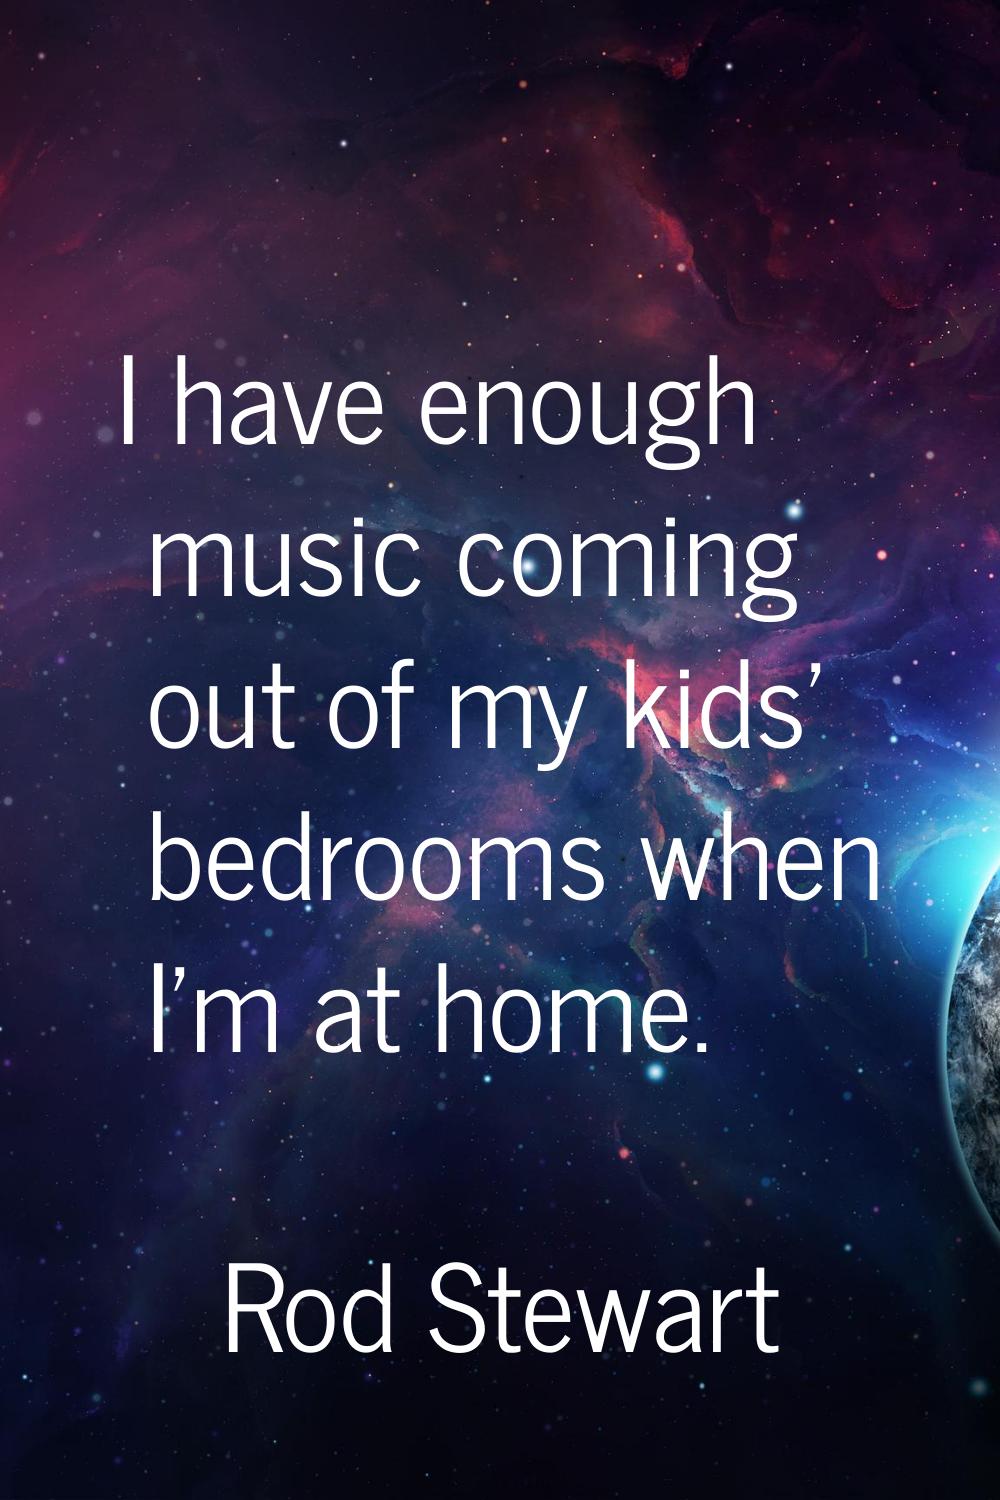 I have enough music coming out of my kids' bedrooms when I'm at home.